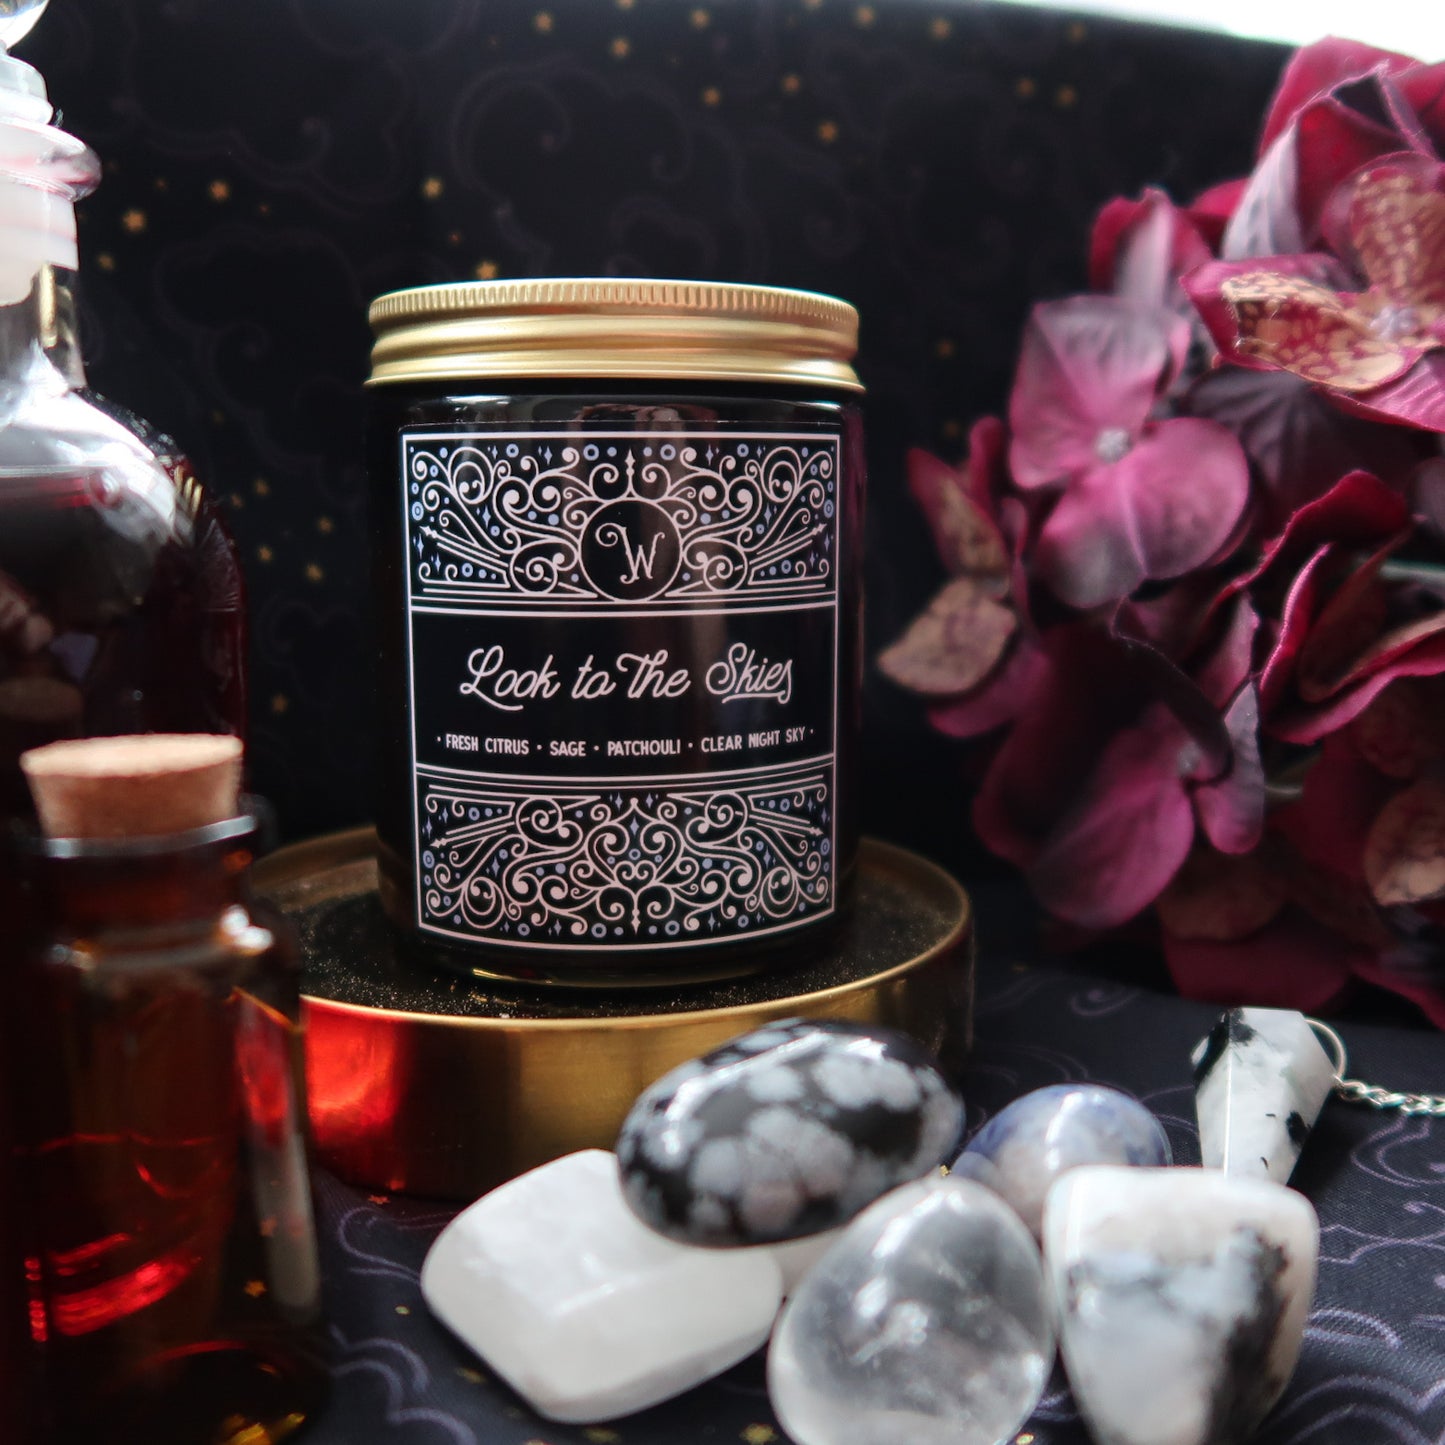 Look to the Skies Candle - Citrus, Sage & Patchouli